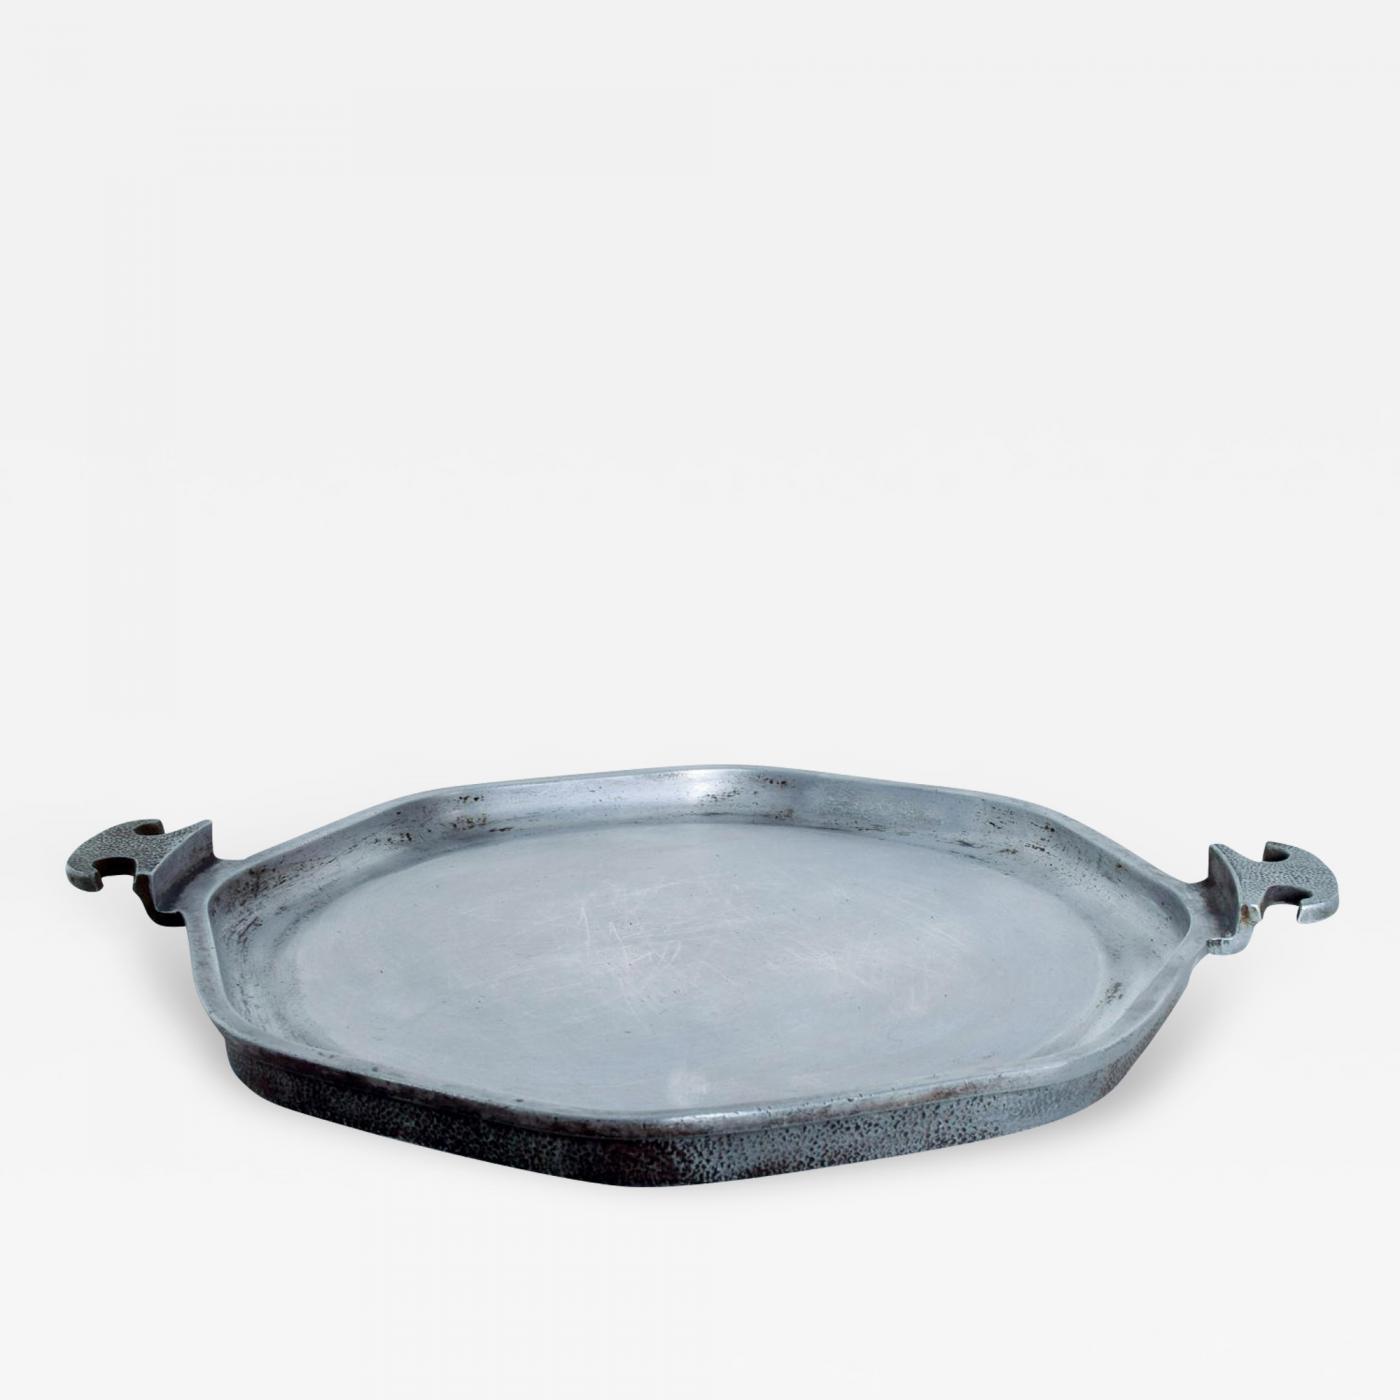 https://cdn.incollect.com/sites/default/files/zoom/Decorative-Service-Aluminum-Tray-by-Guardian-Service-342303-1236950.jpg